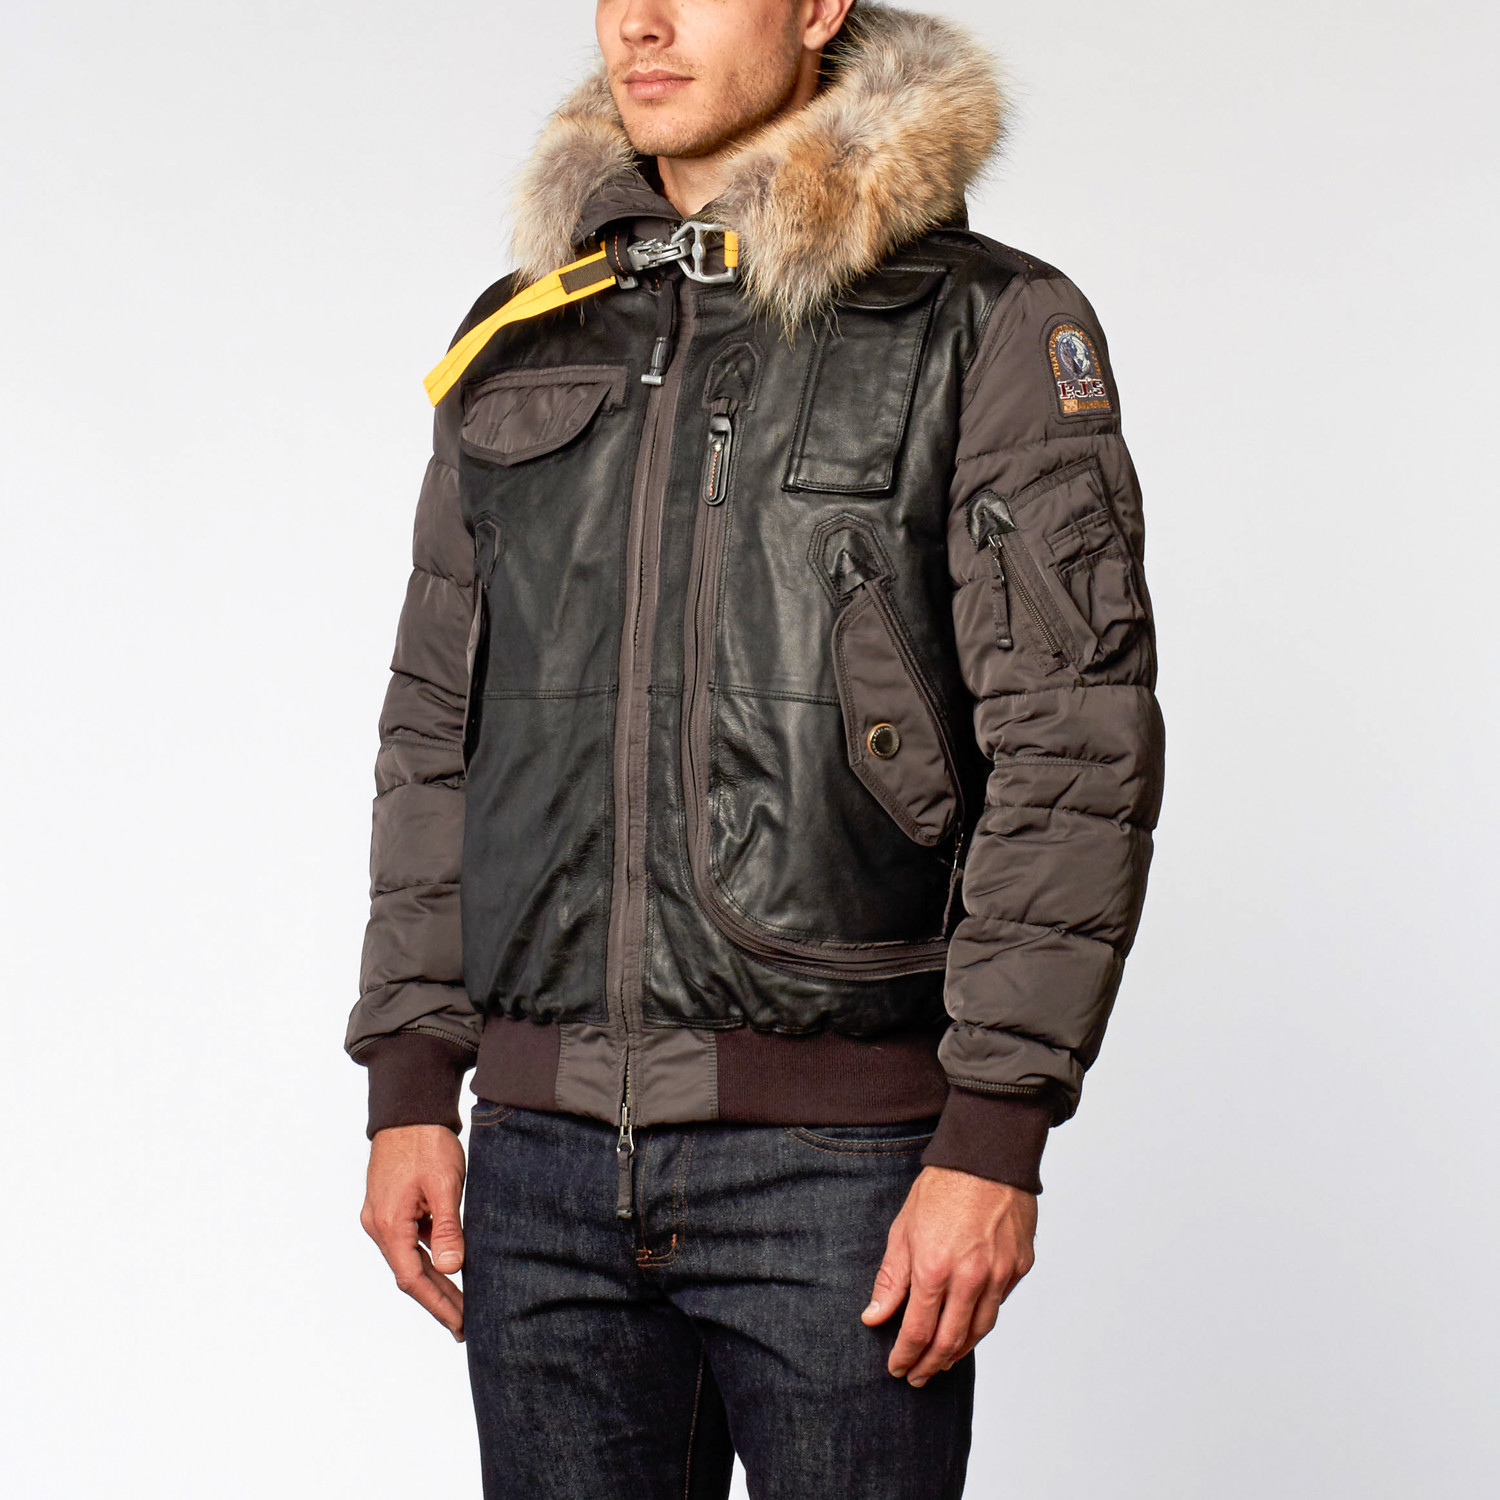 parajumper grizzly jacket